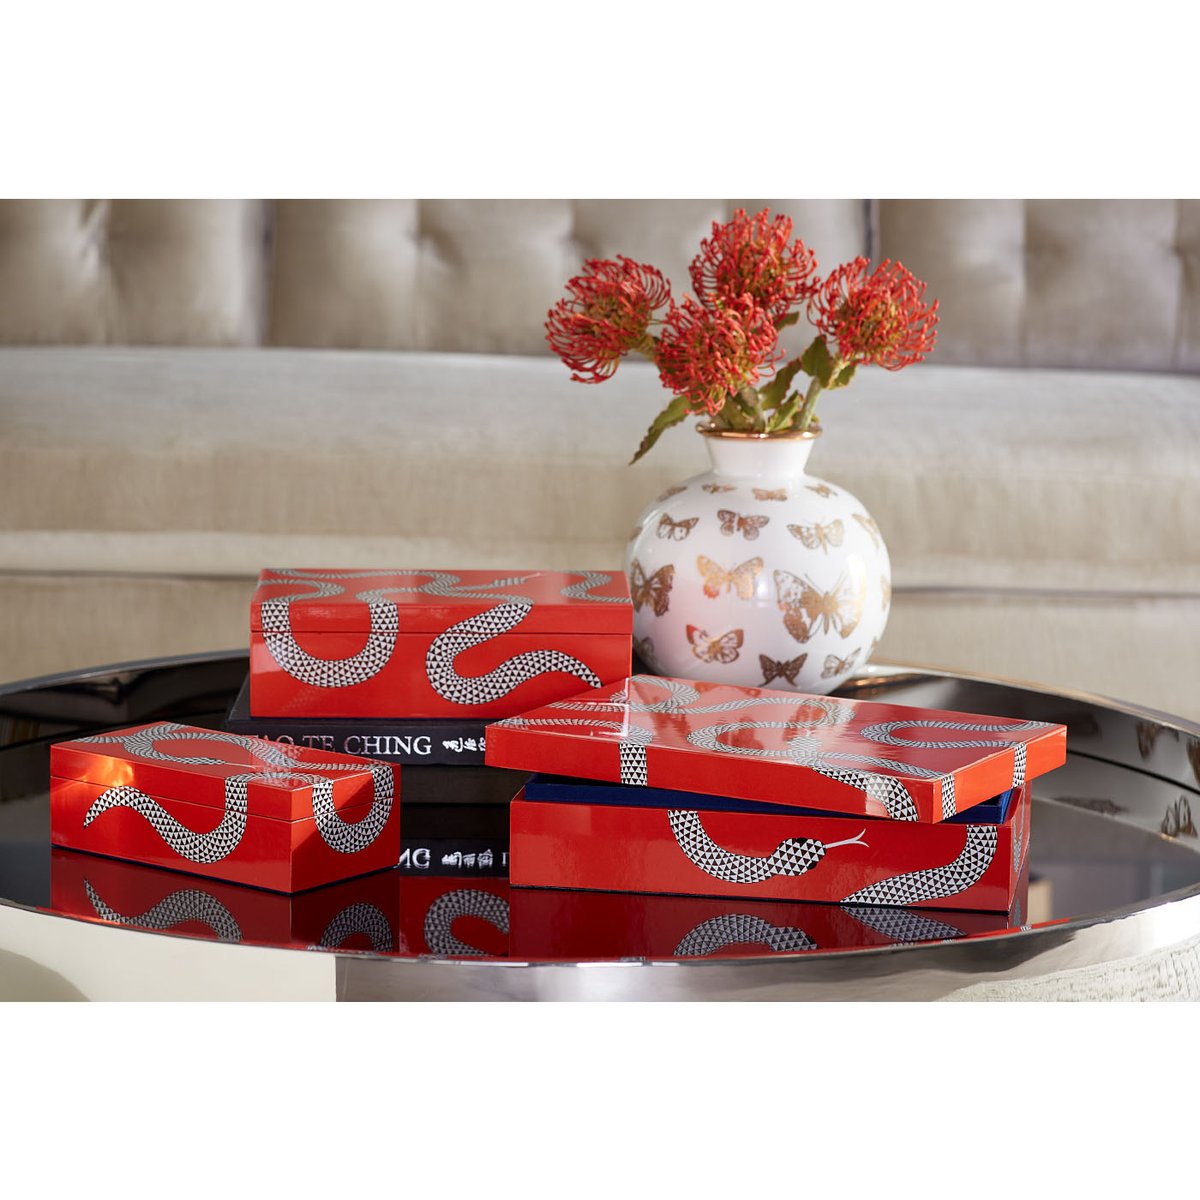 Eden Lacquer Boxes by Jonathan Adler